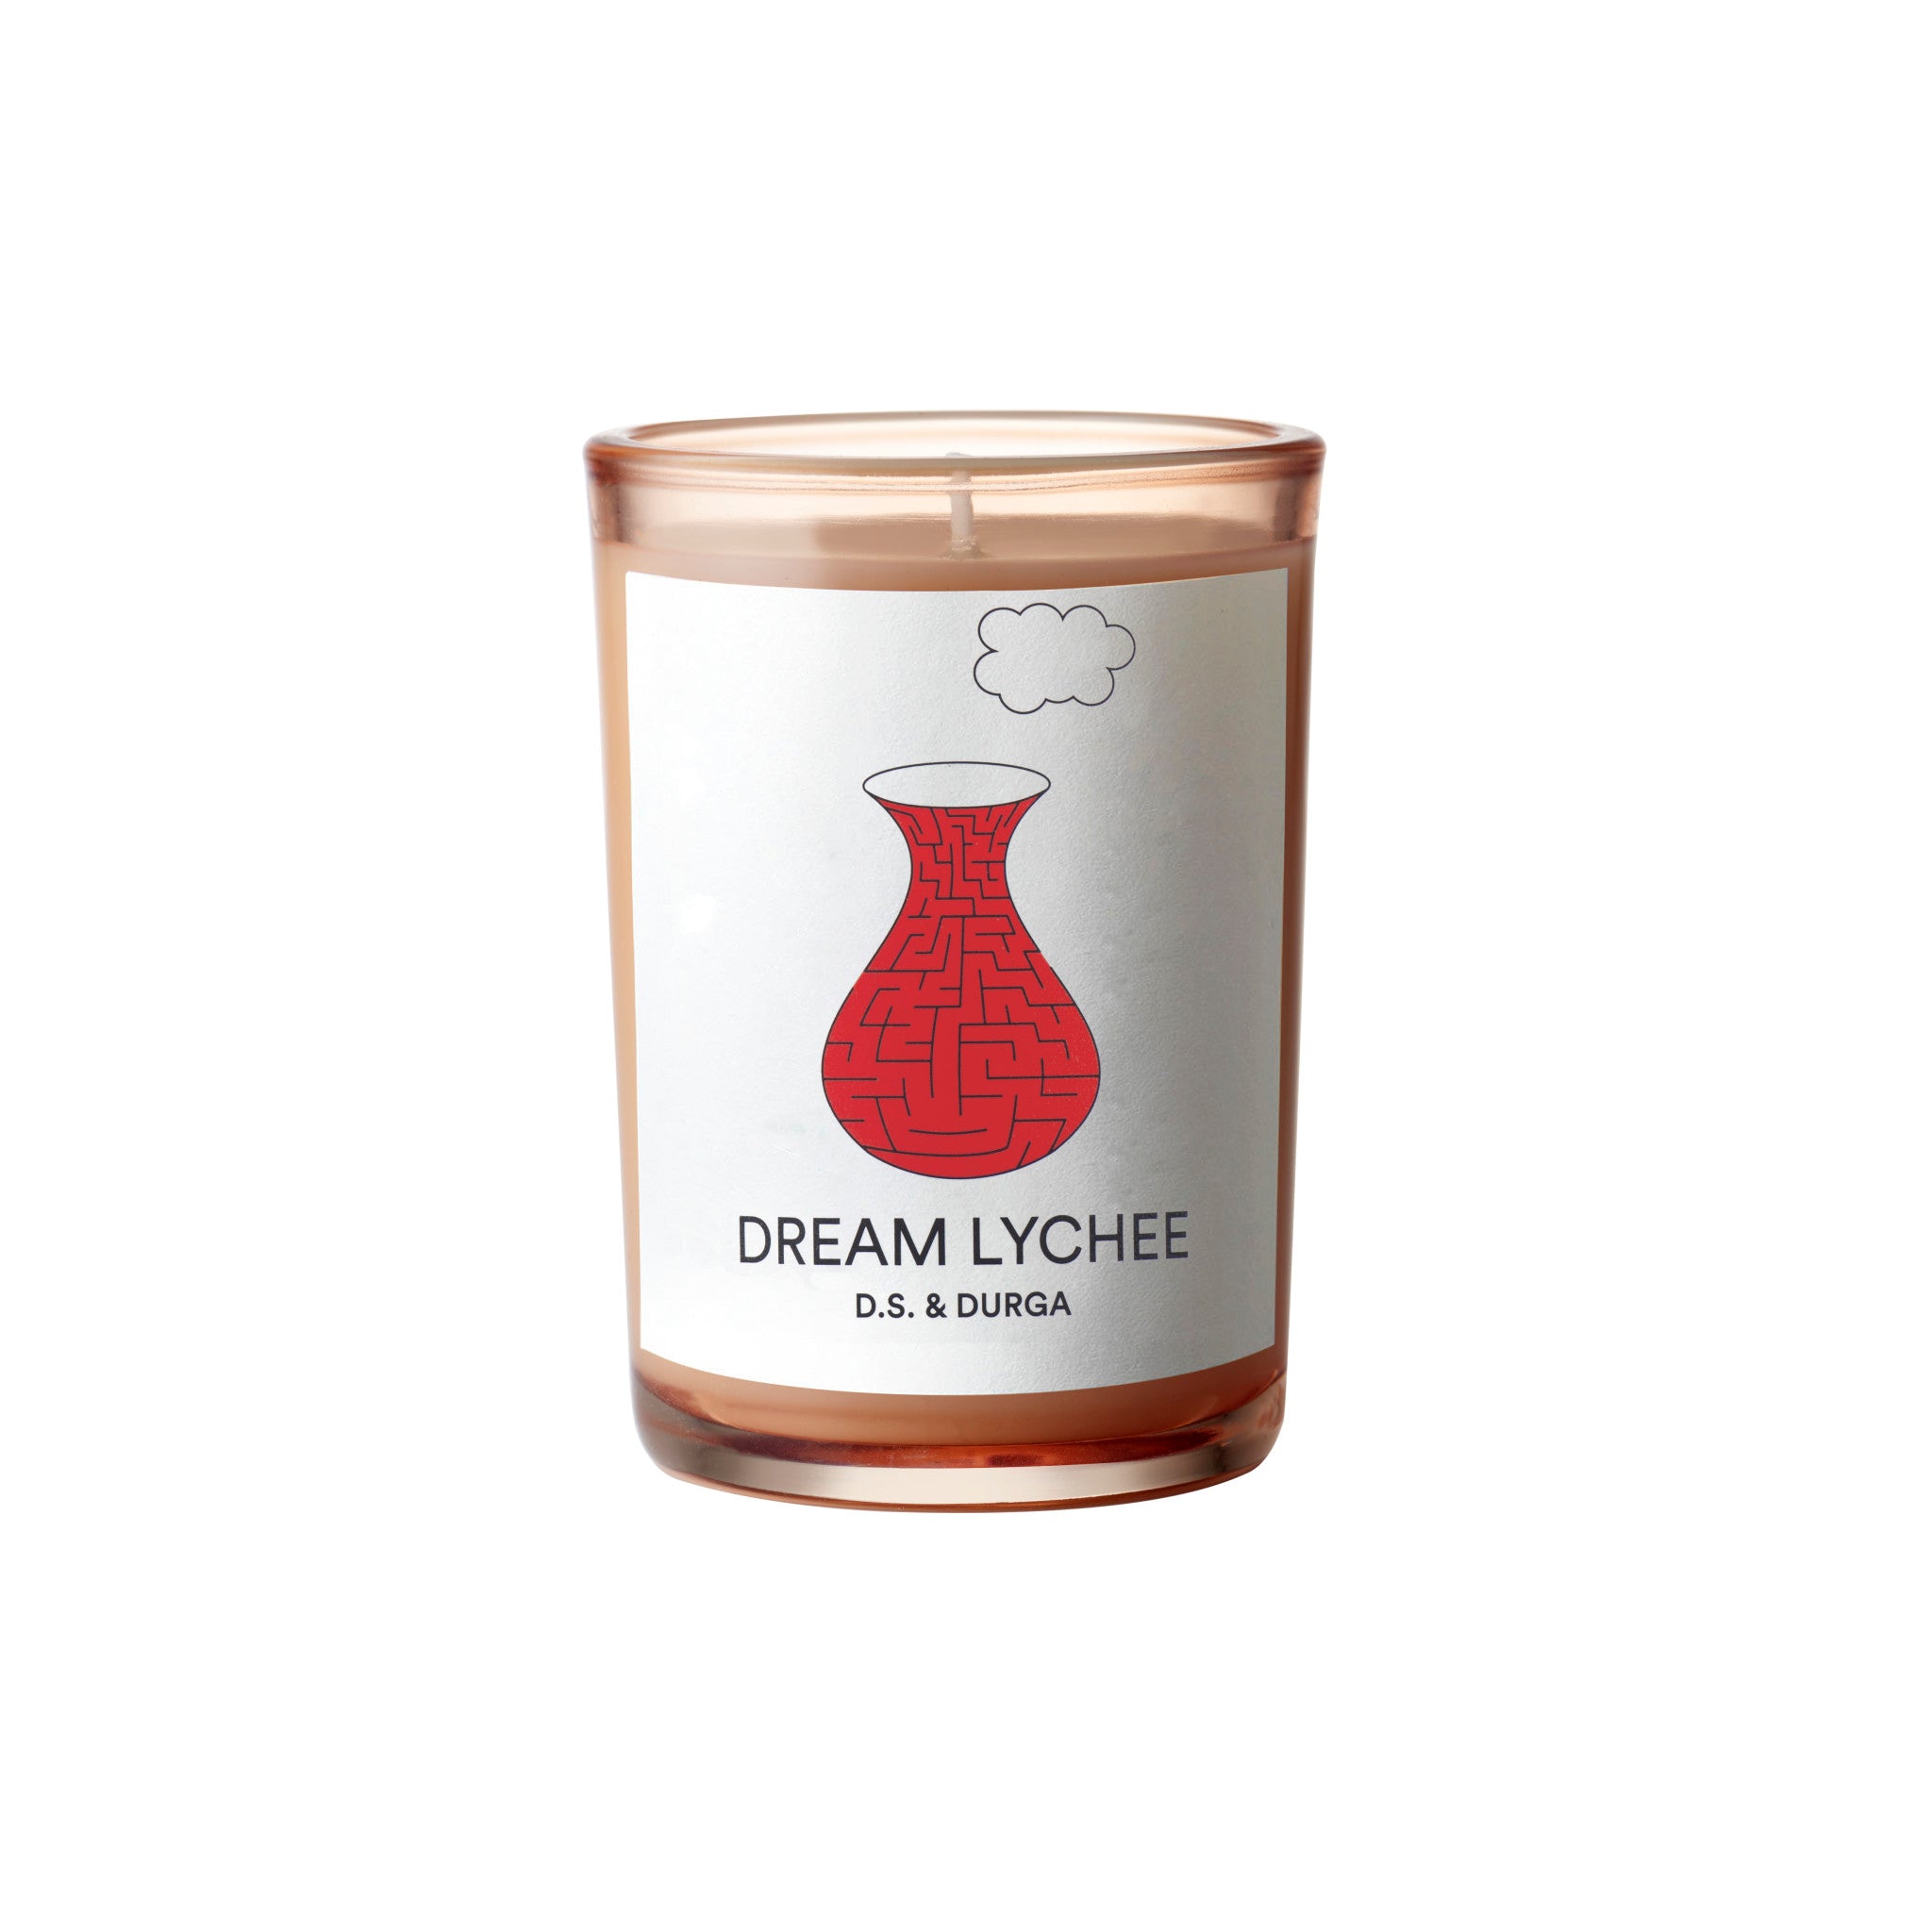 D.S. & Durga Dream Lychee Candle main image.